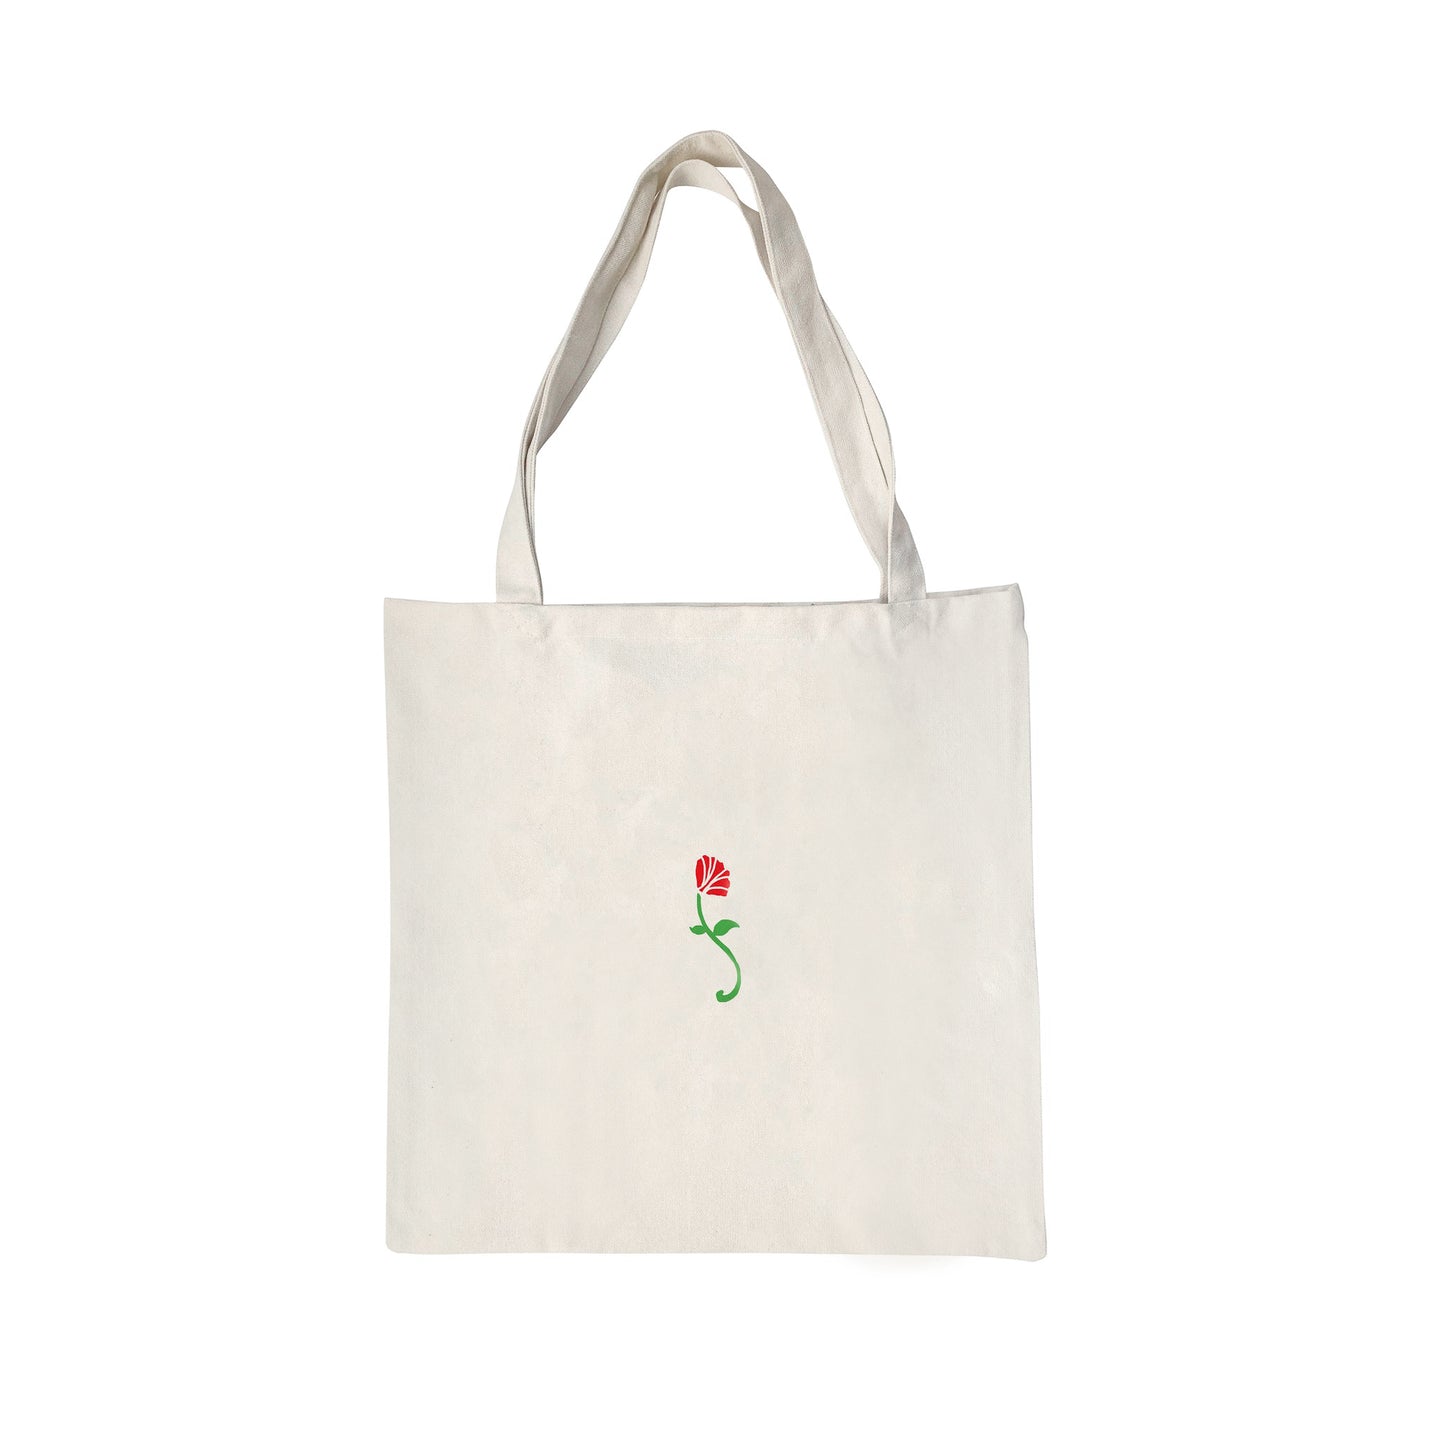 The Virtue and Vice Tote Bag